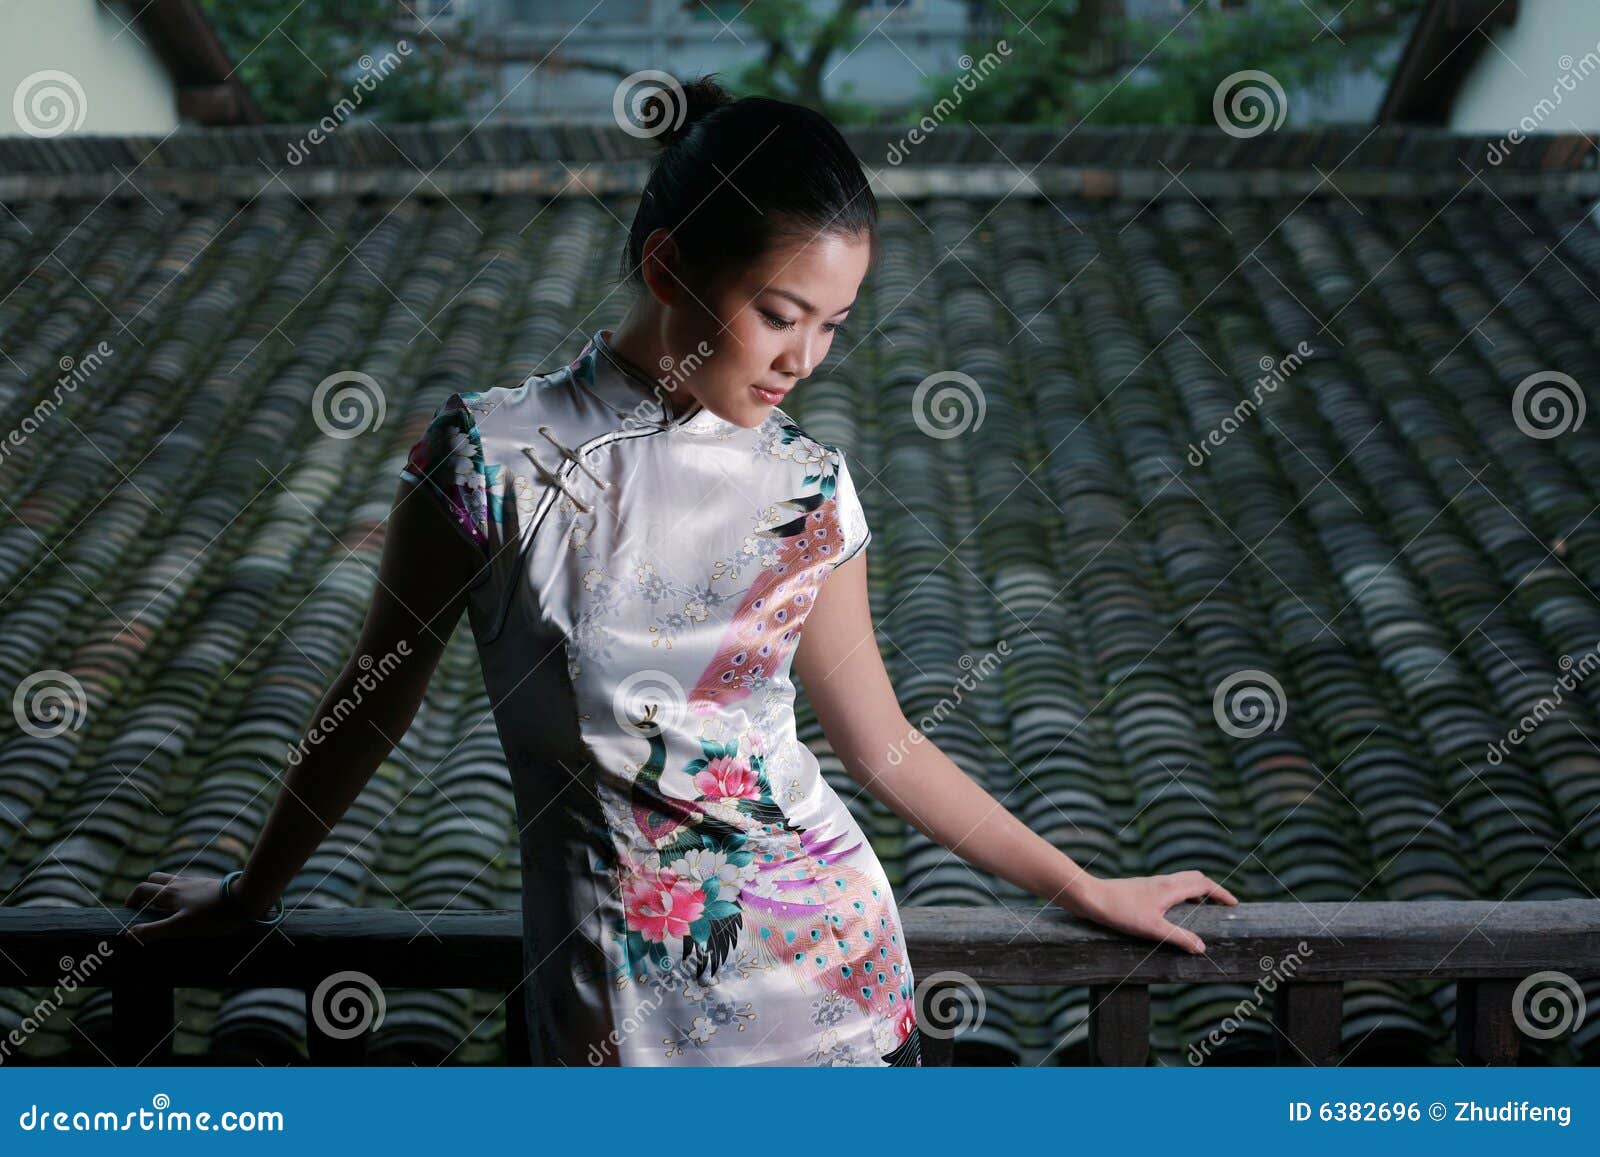 chinese girl in tradition dress